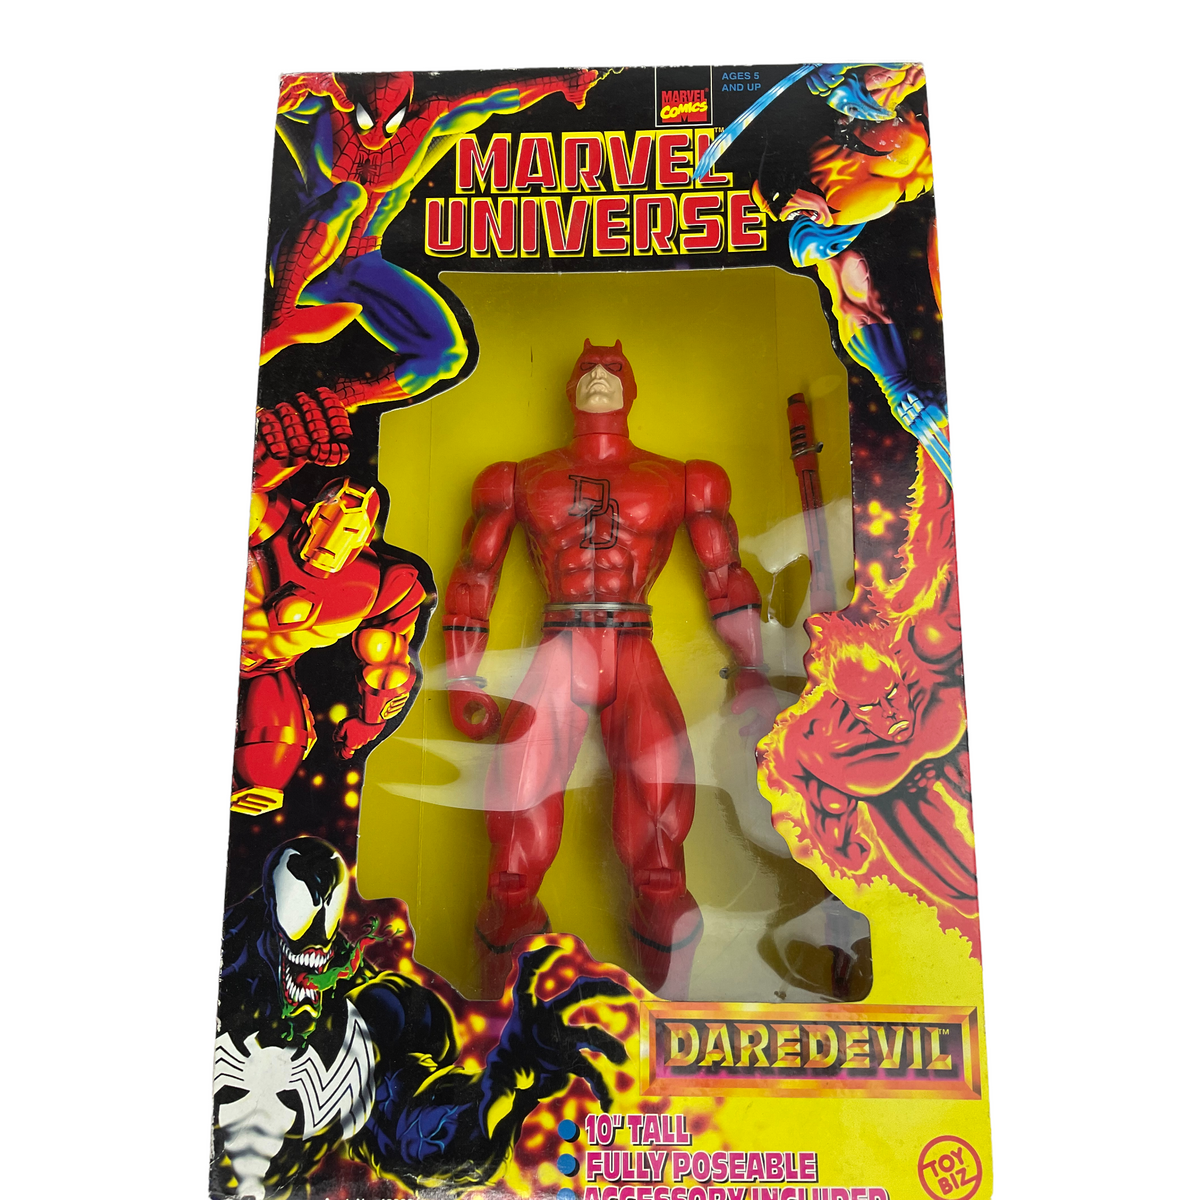 Daredevil 10" Figure From Marvel Universe Collection